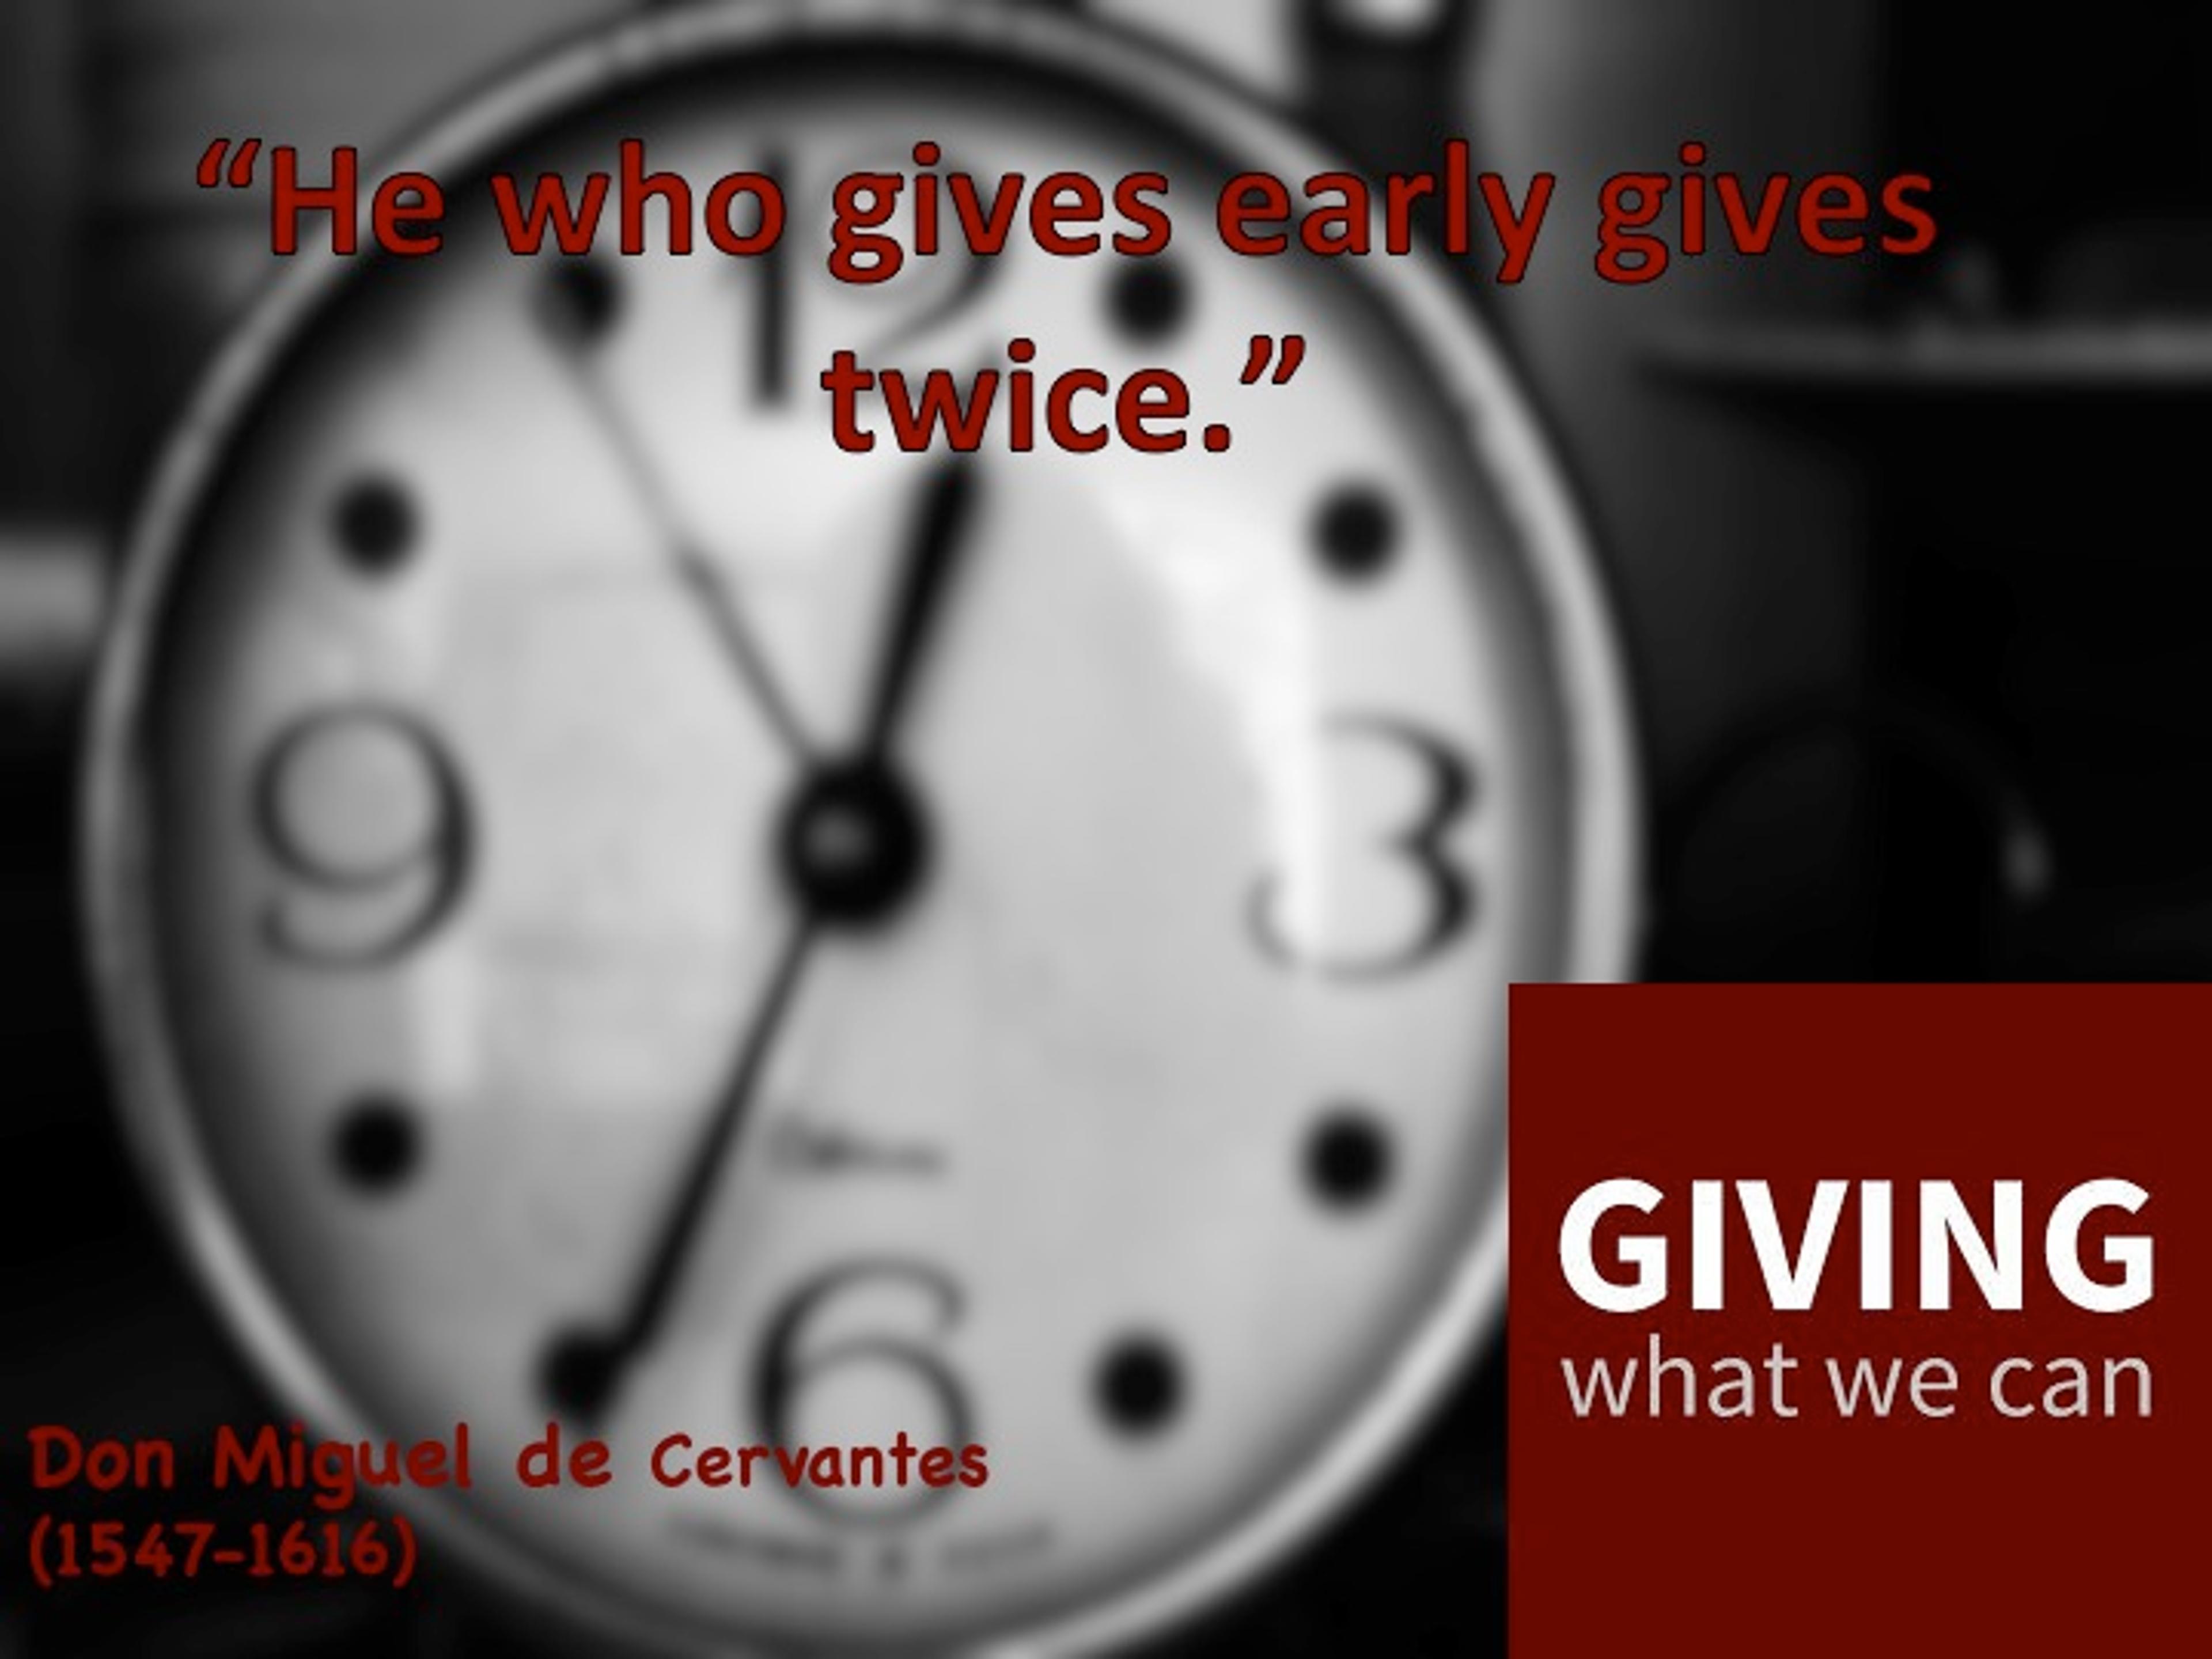 He who gives early gives twice.